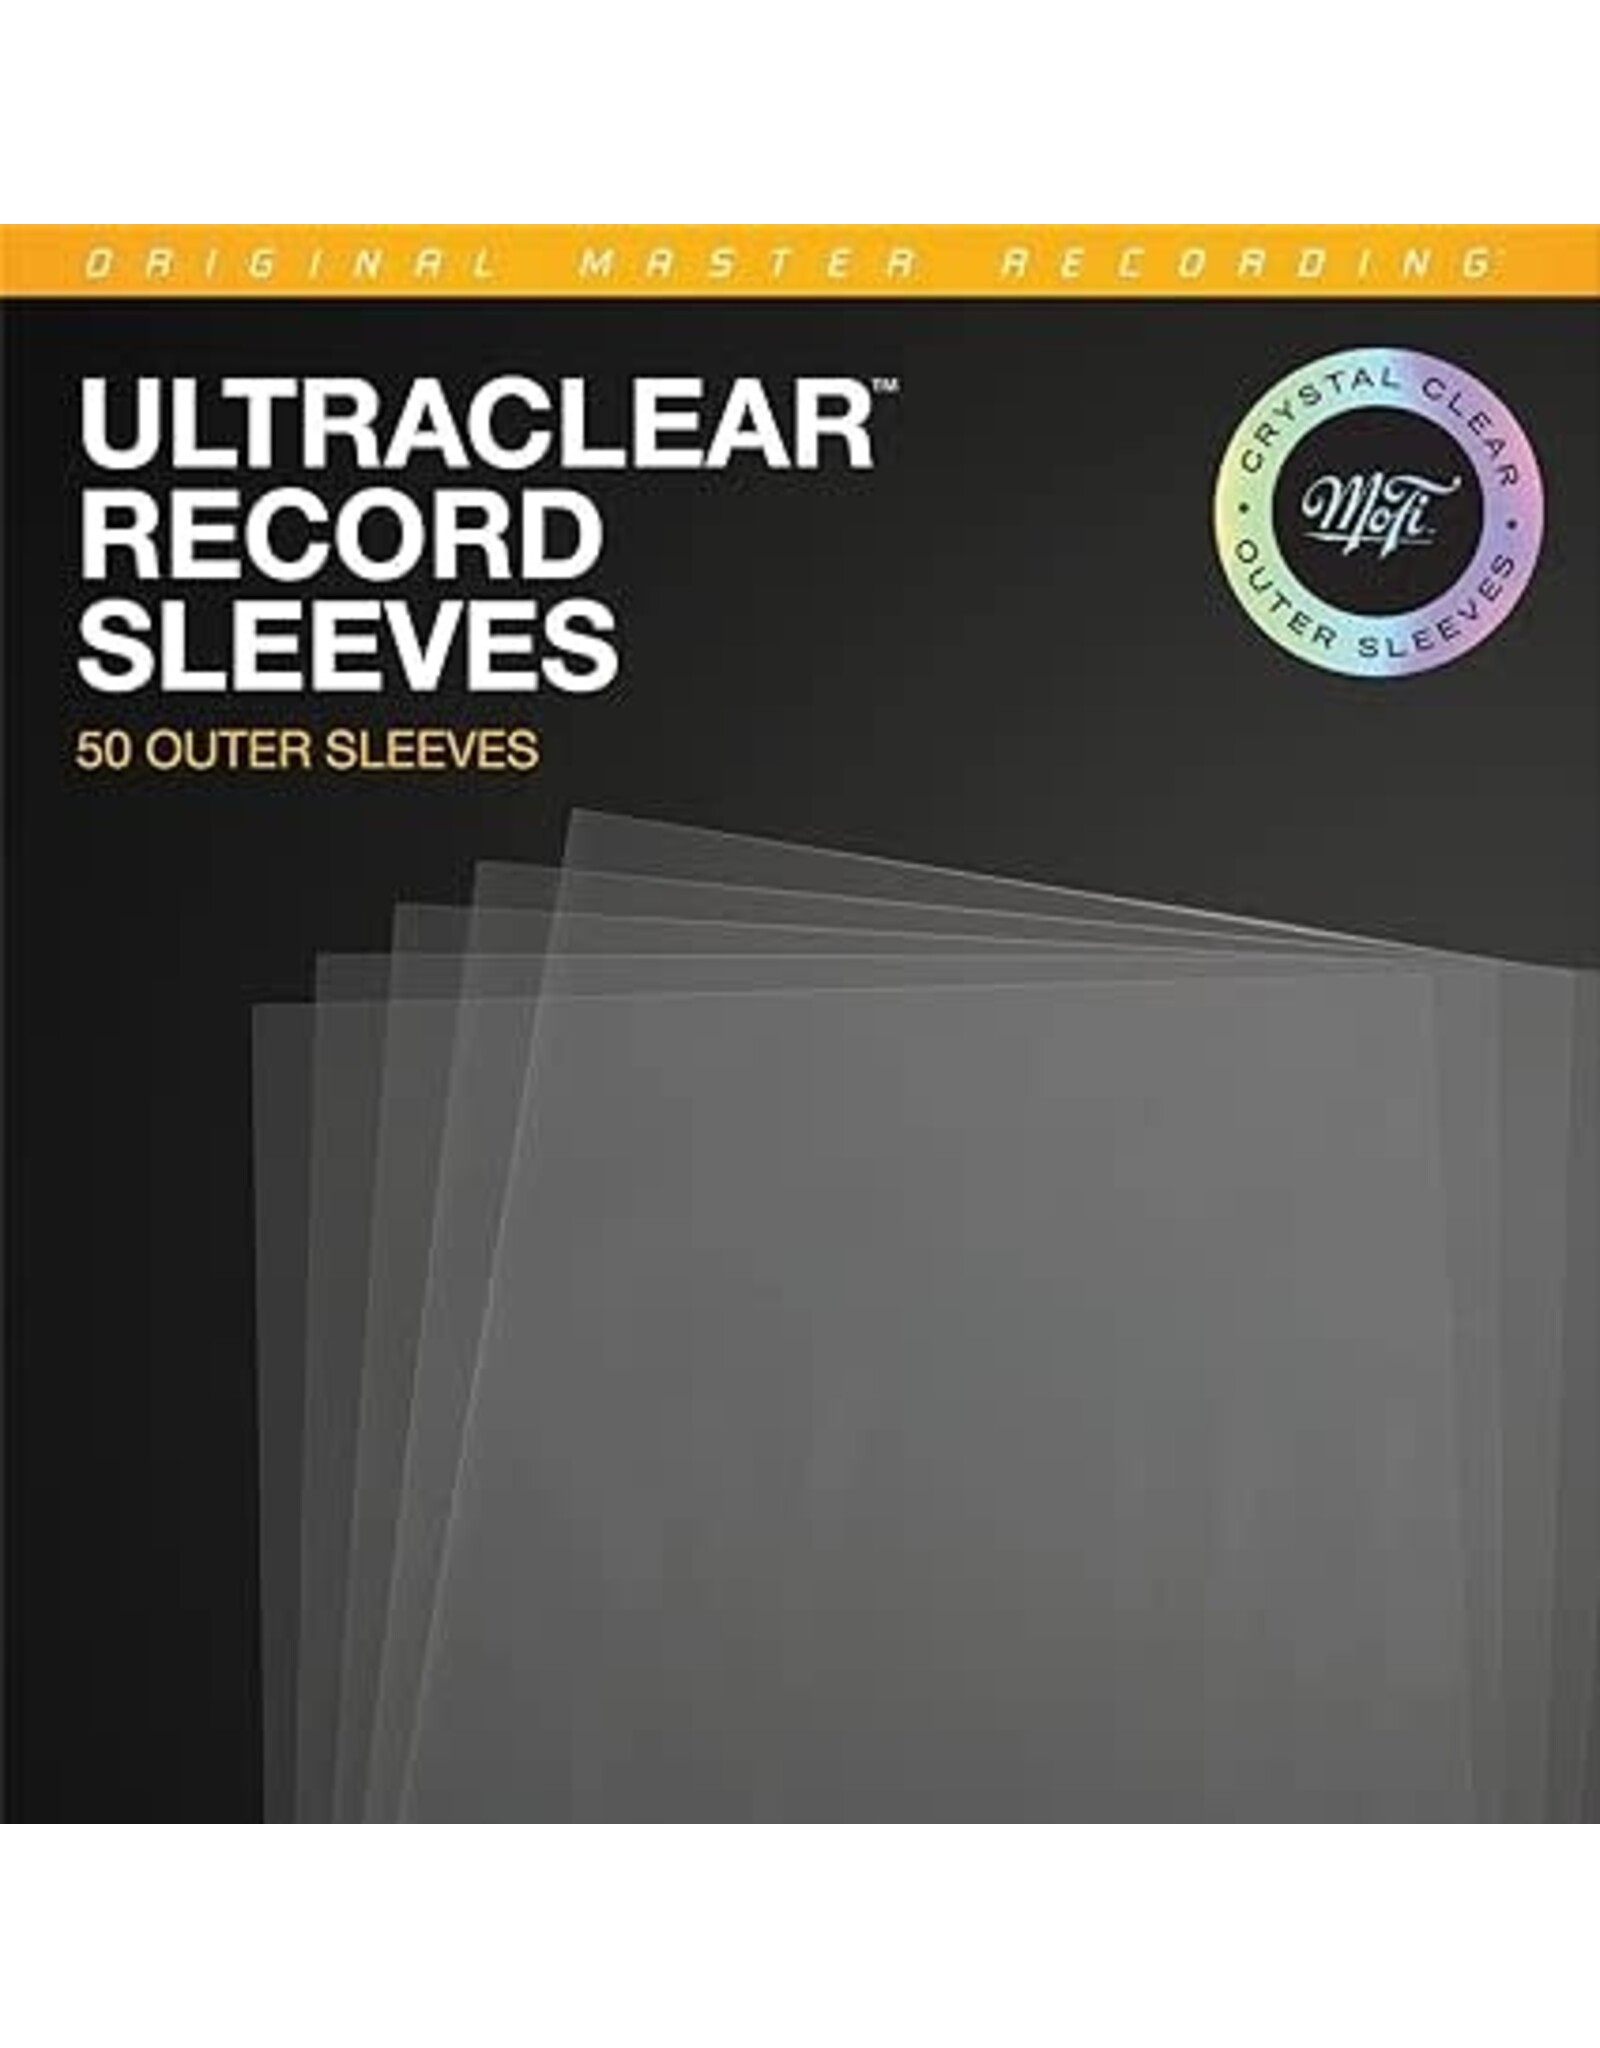 Mobile Fidelity / Ultraclear Outer Sleeves (50 pack)